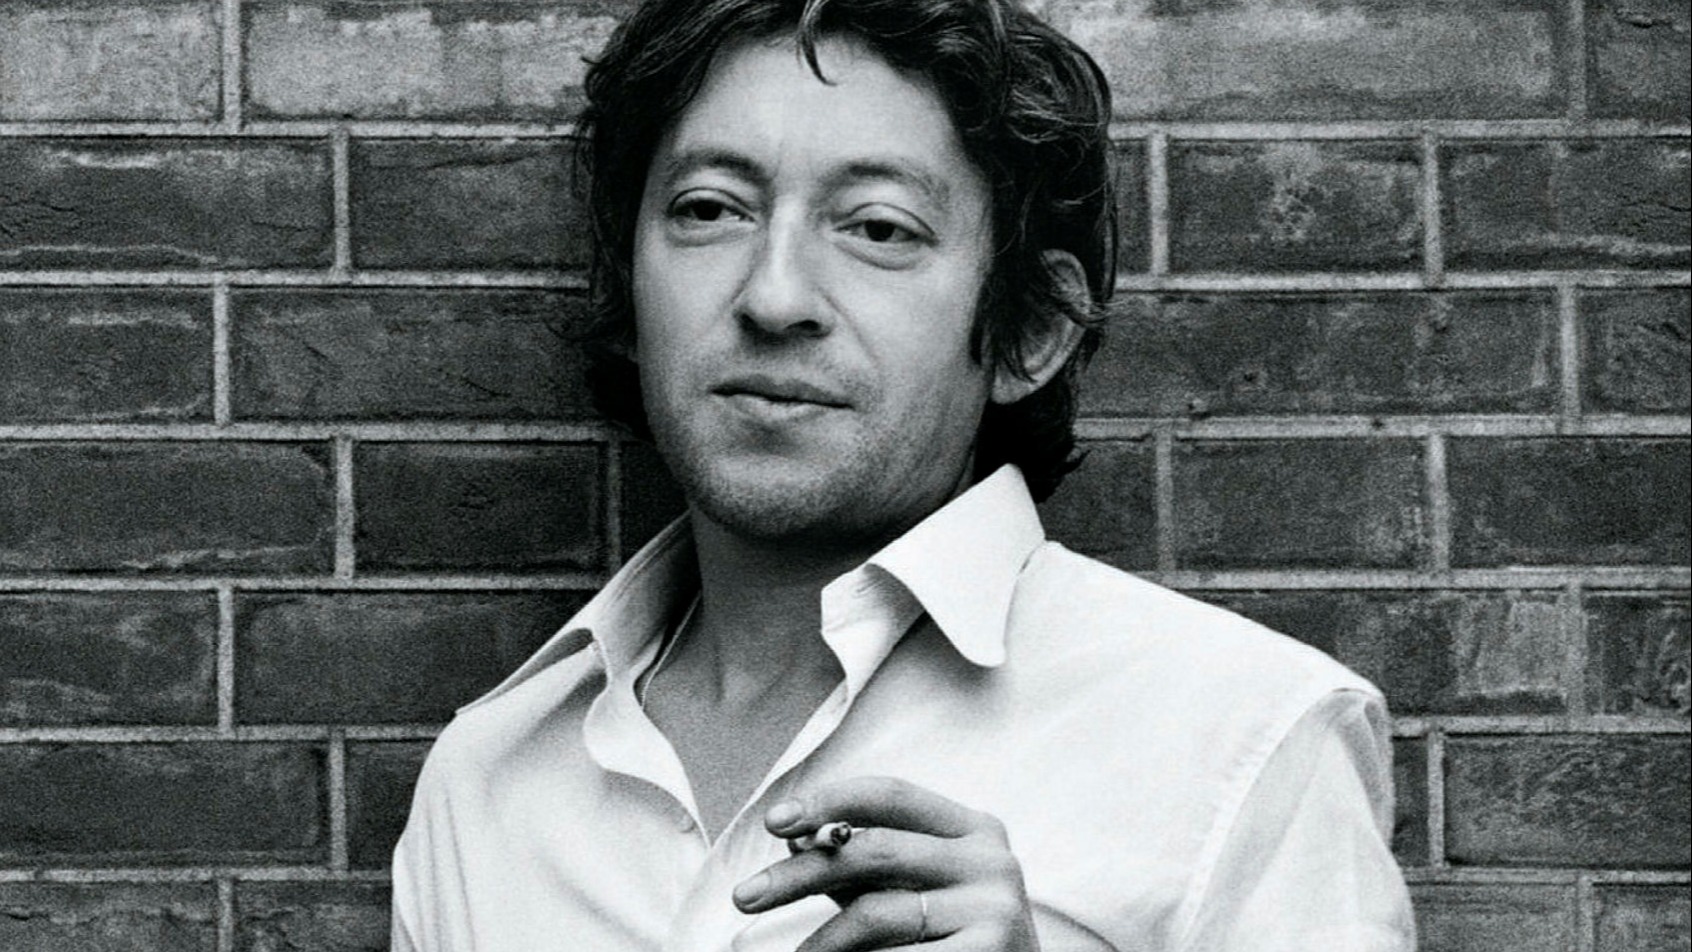 Serge Gainsbourg Ces Petits Riens accords